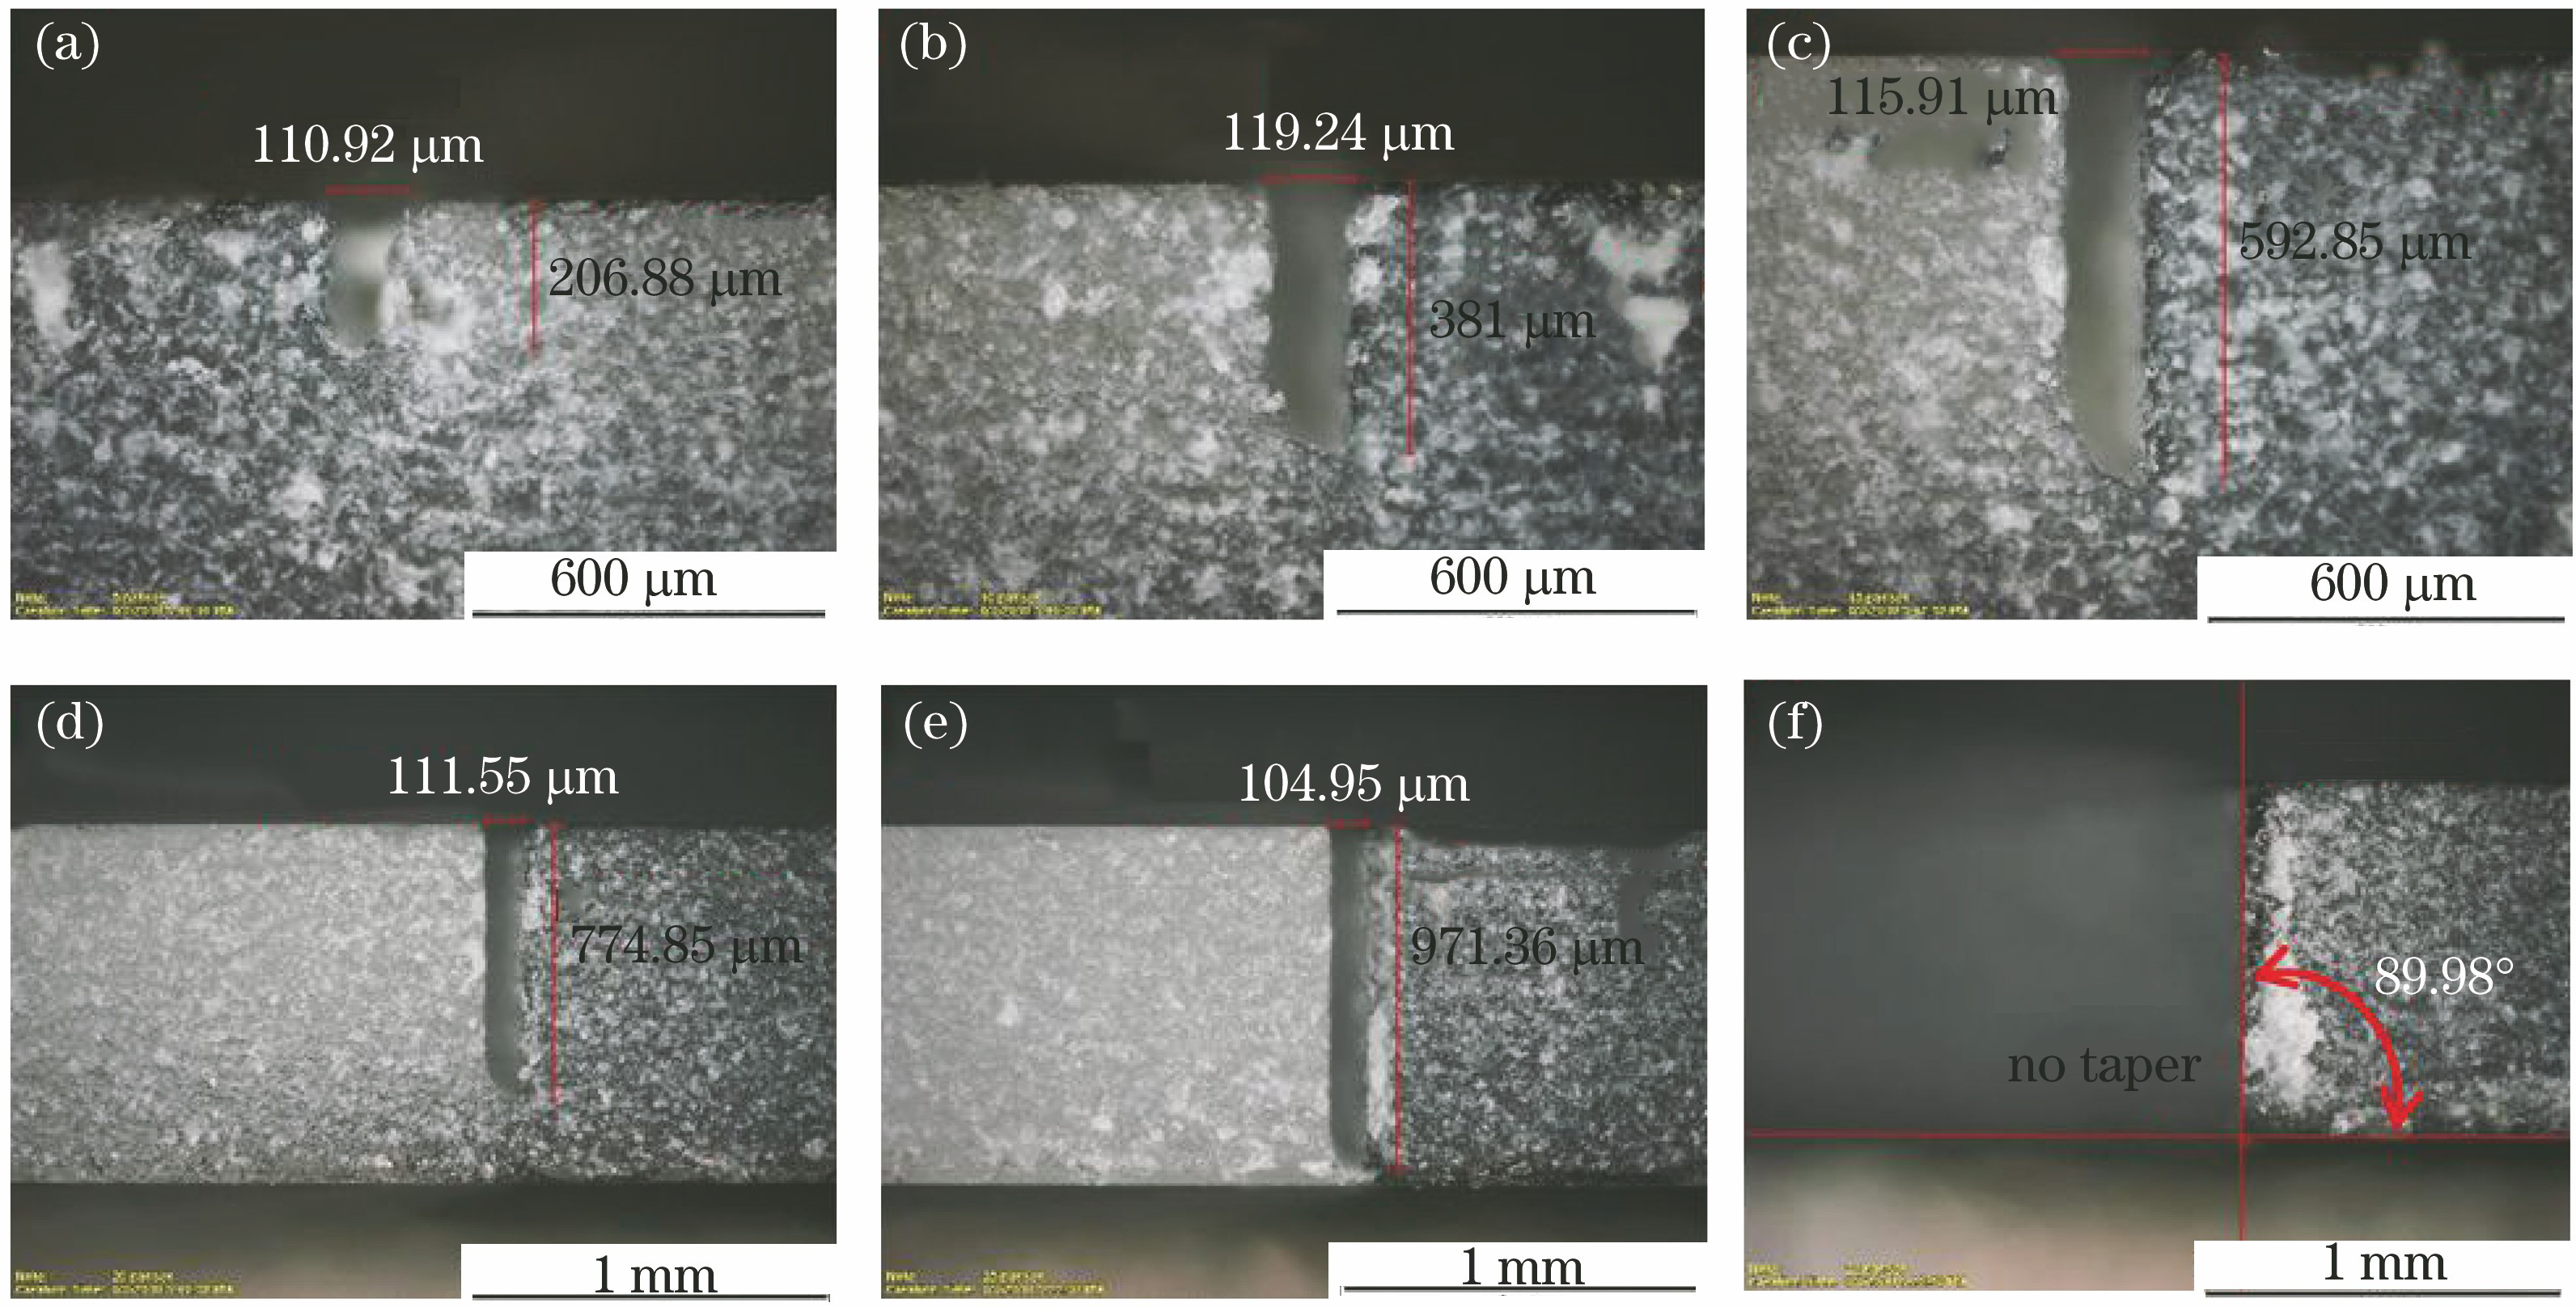 Cut results of glass slide at different scan times with nanosecond green laser bottom-up processing. (a) 5 times; (b) 10 times; (c) 15 times; (d) 20 times; (e) 25 times; (f) 28 times, cut through